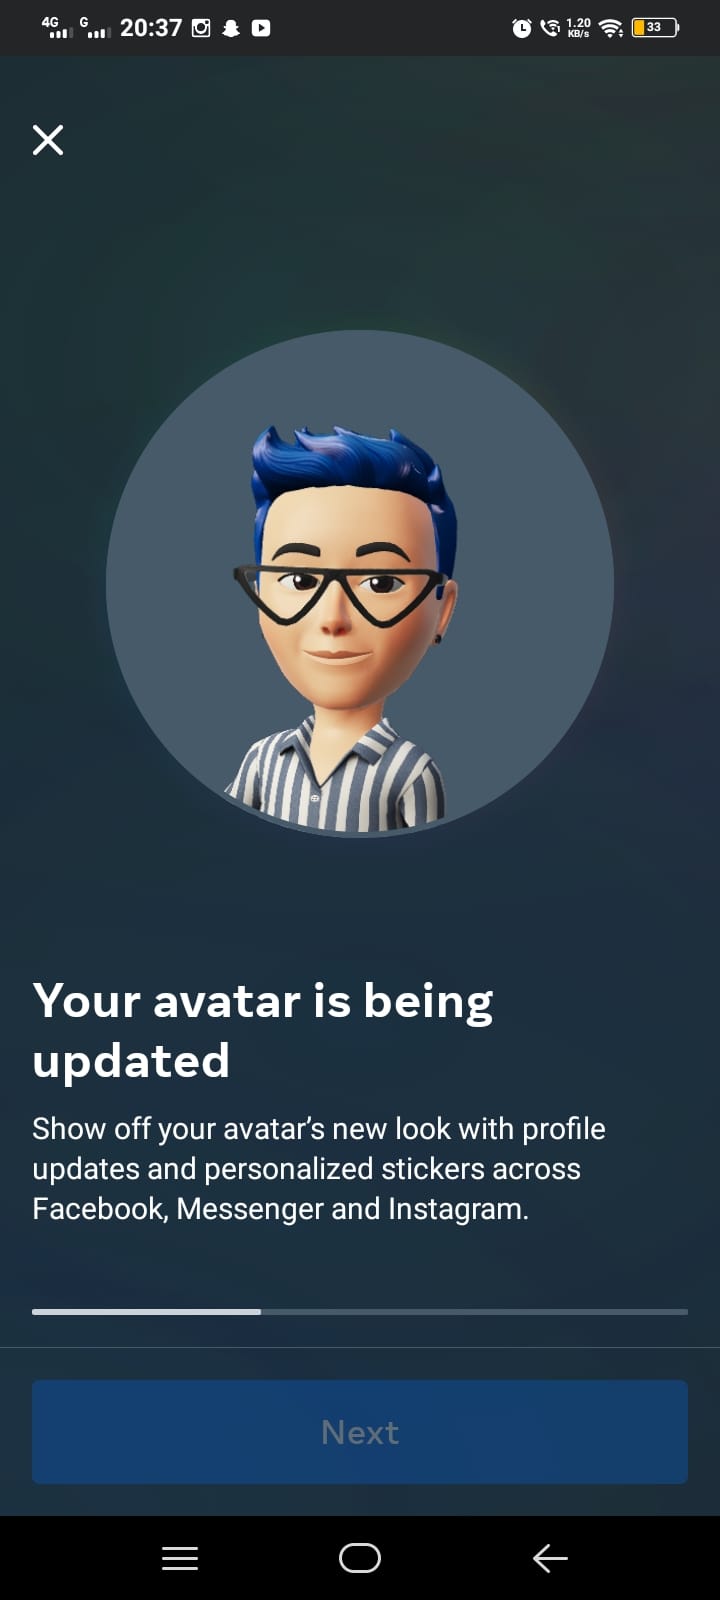 How to make your digital avatar on Facebook?